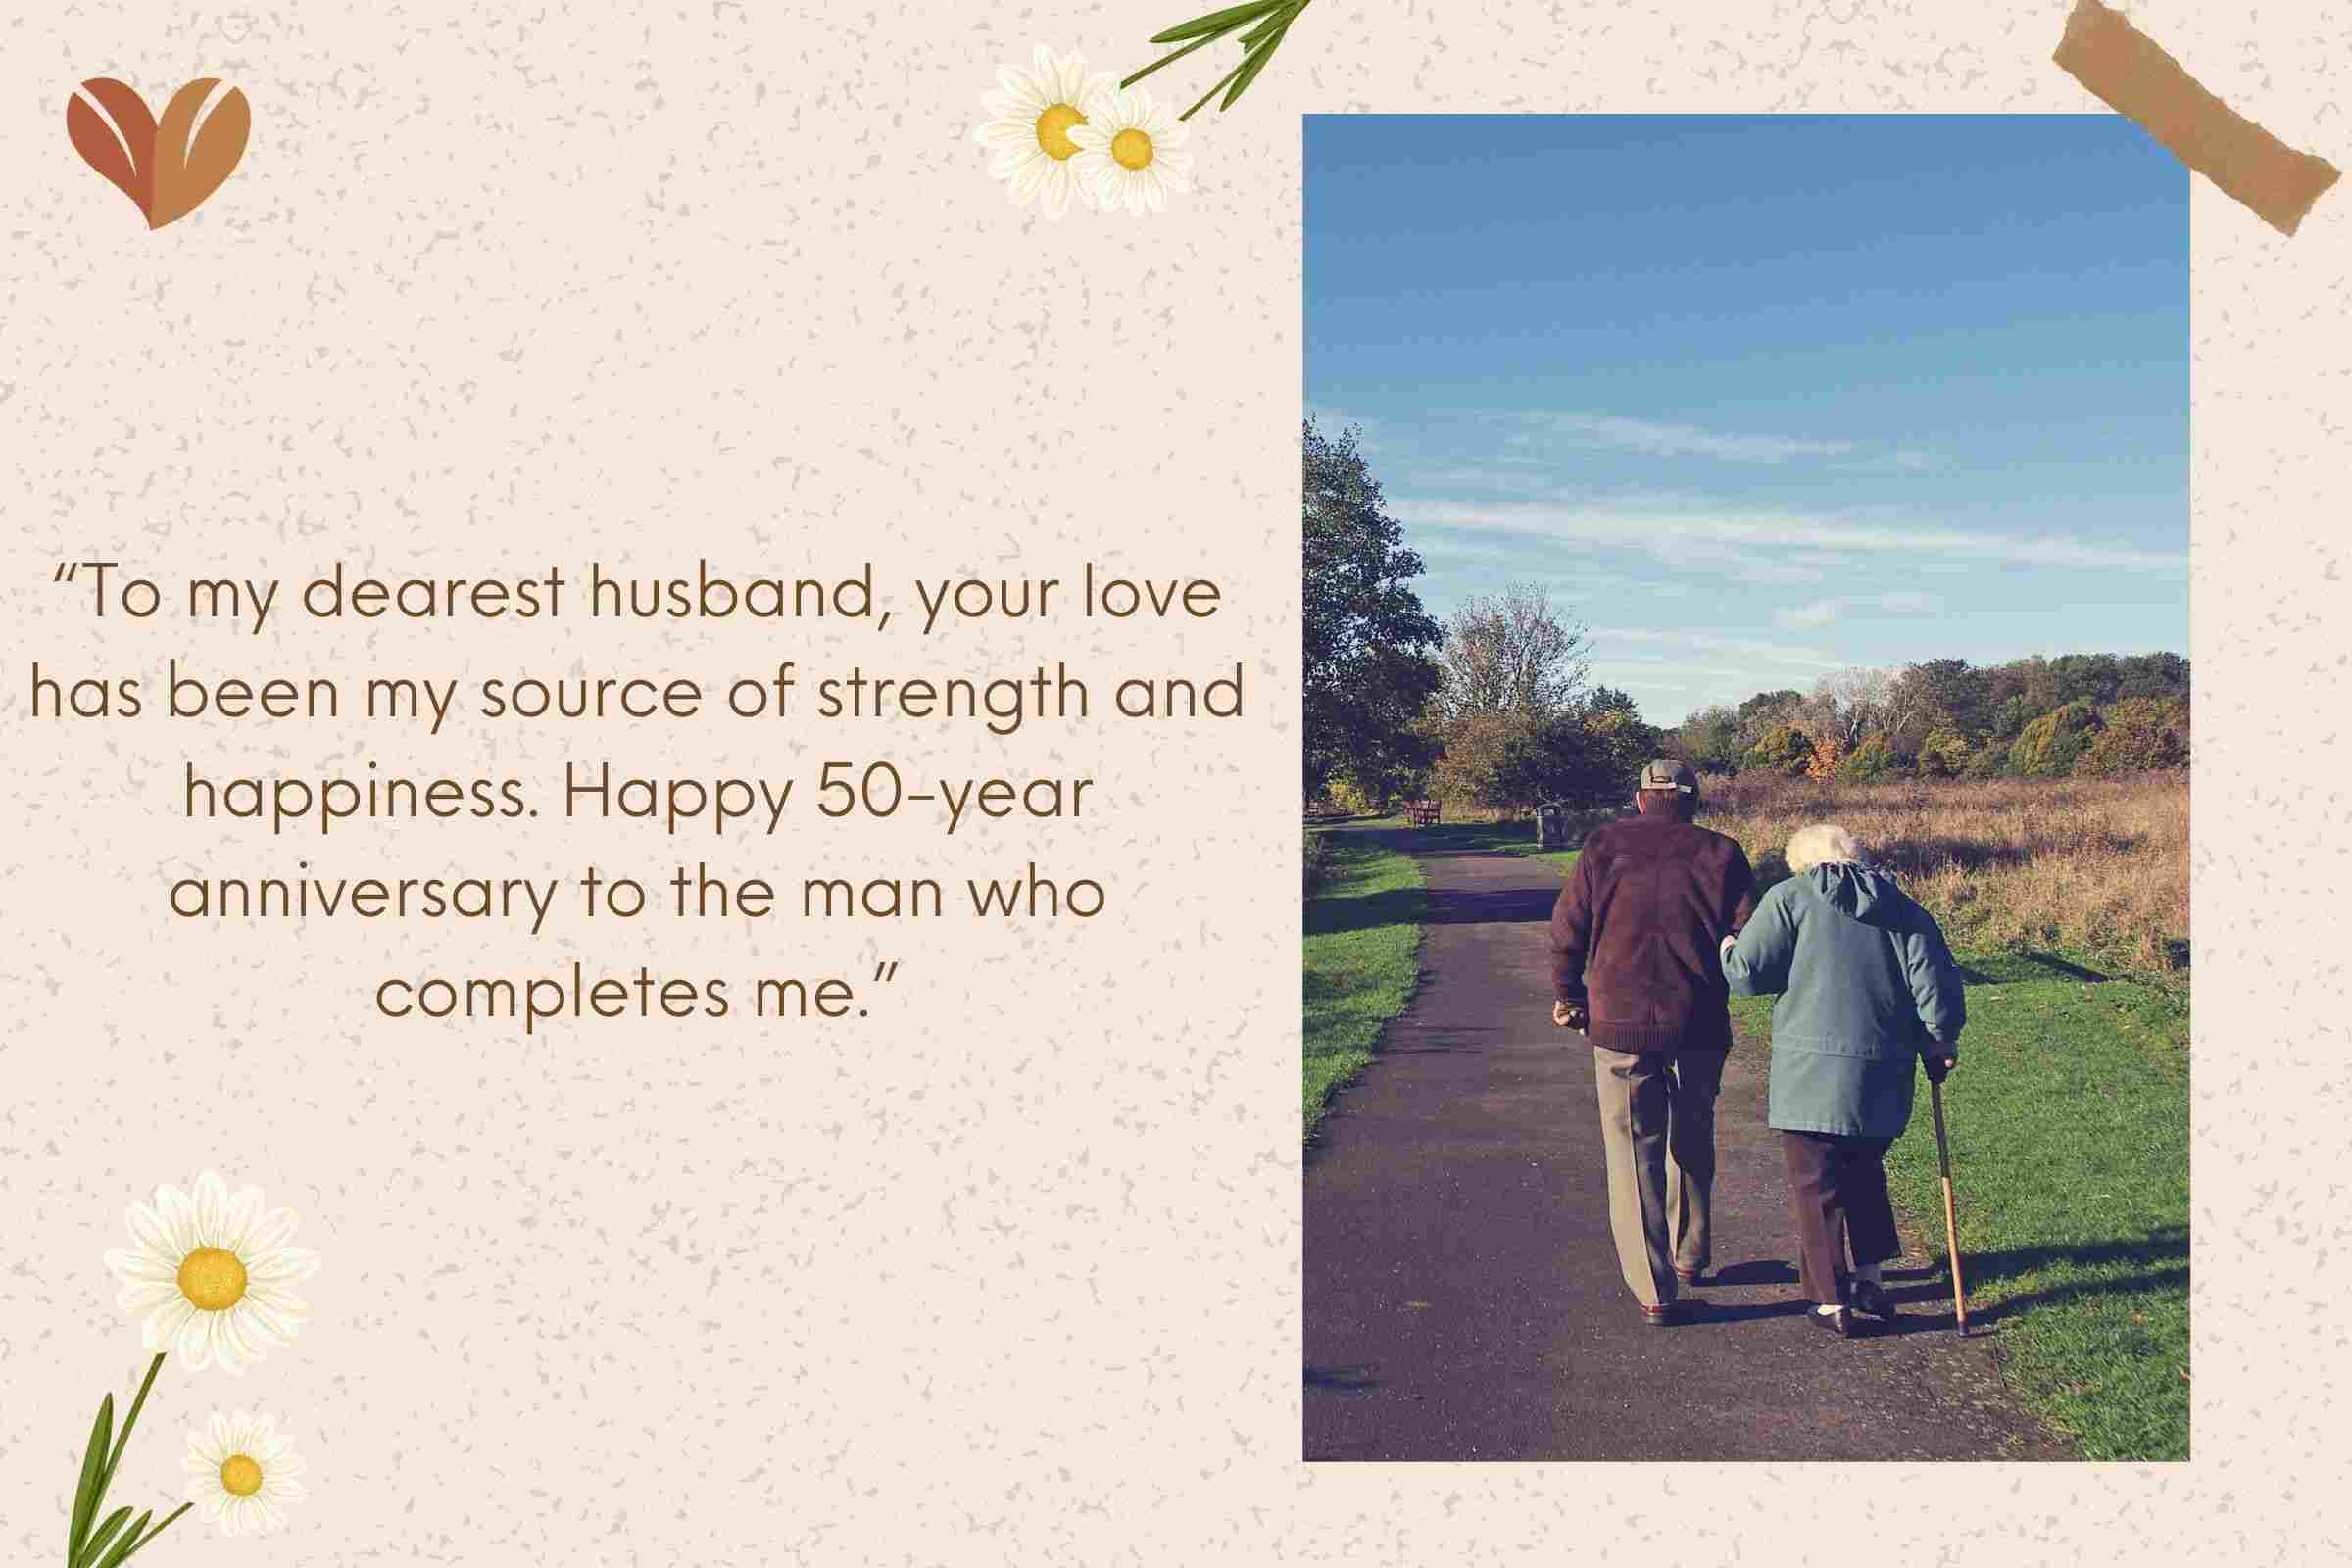 To my dearest husband, your love has been my source of strength and happiness. Happy 50 year anniversary to the man who completes me.